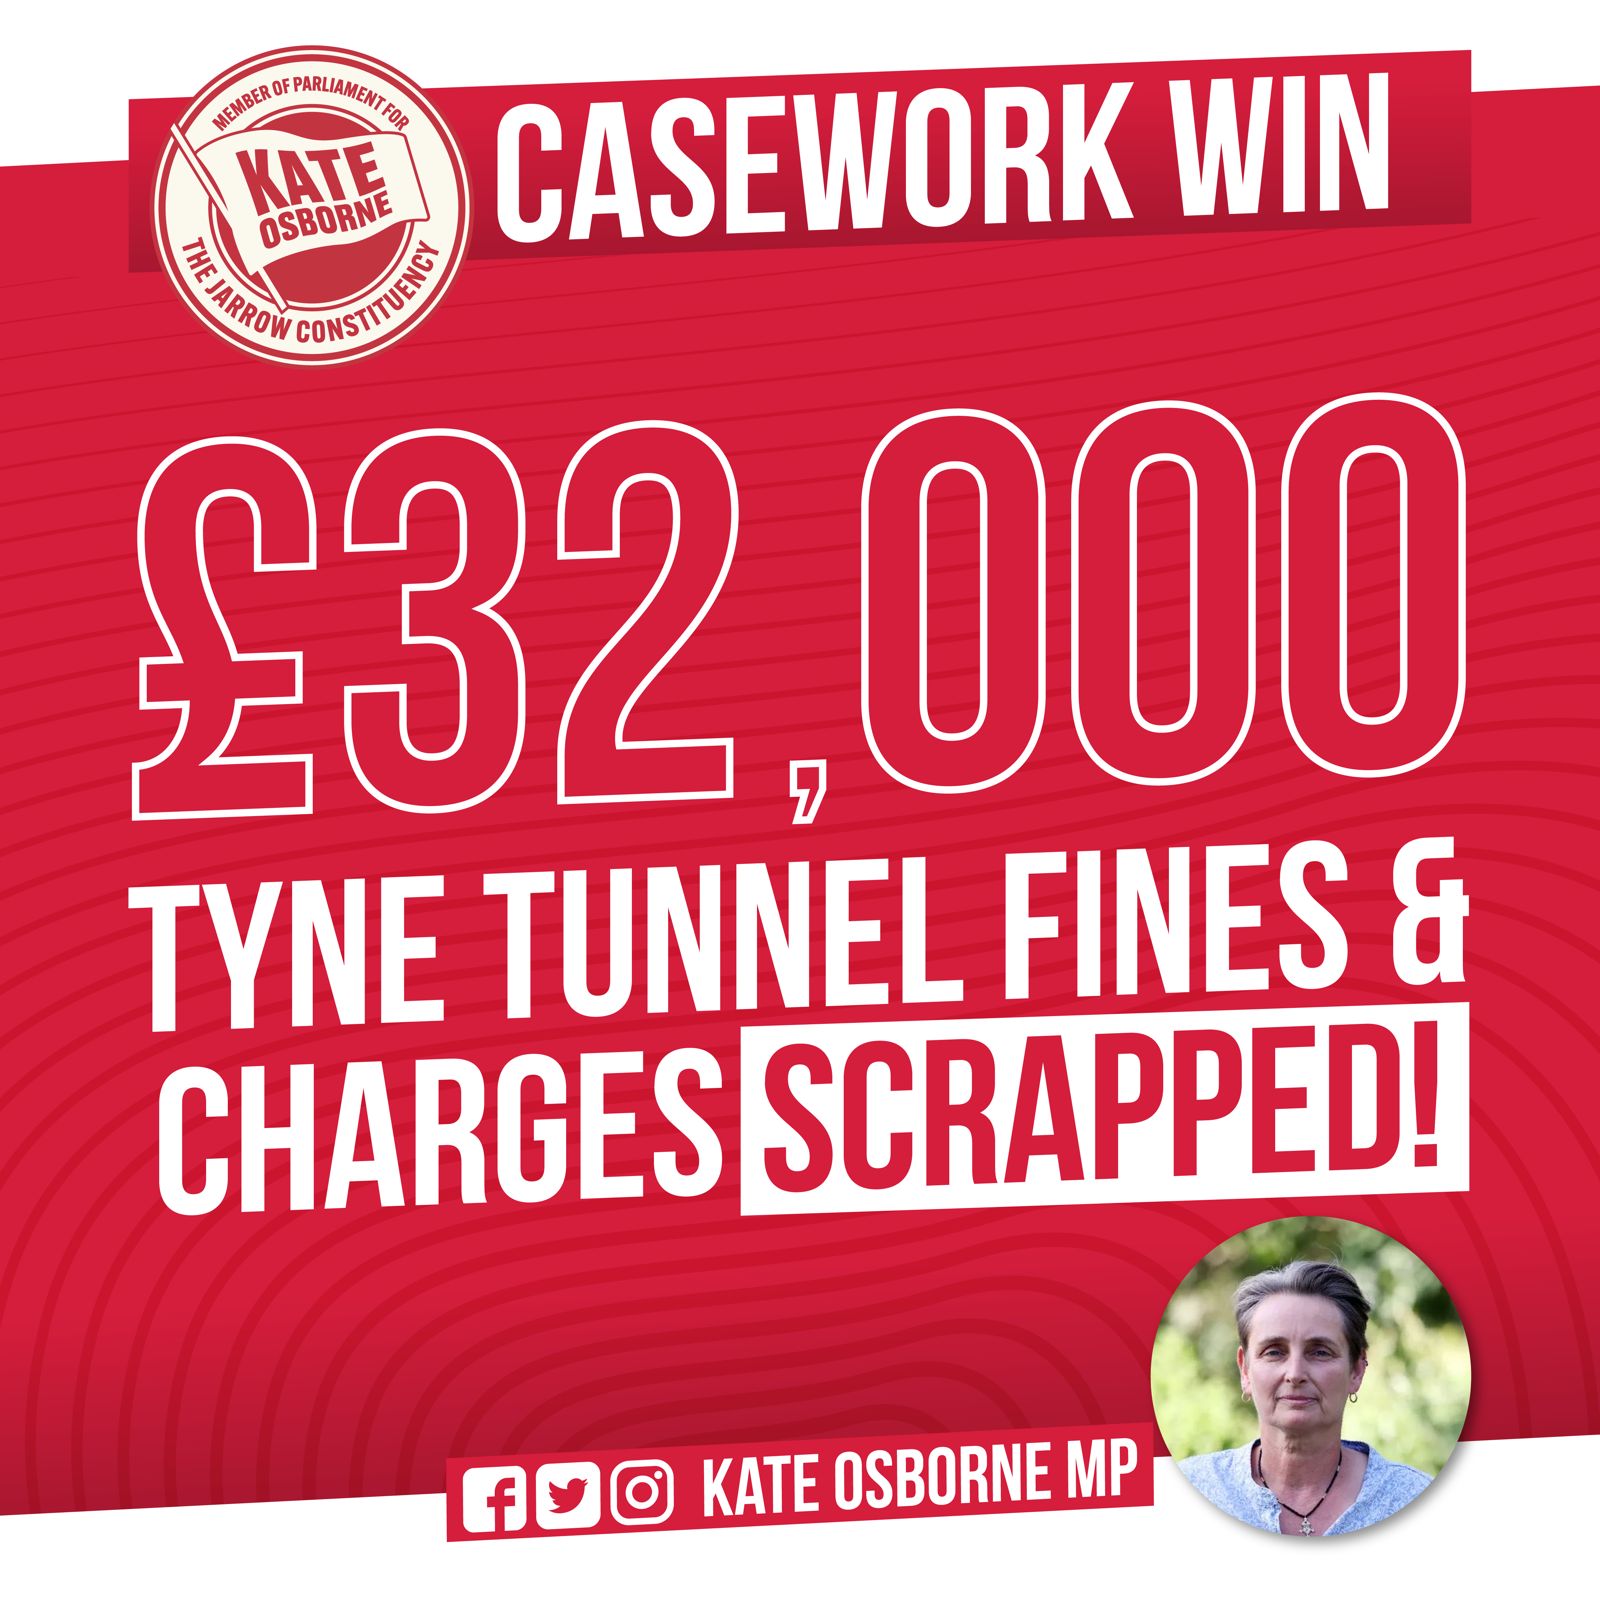 Huge win for constituents as Jarrow MP gets multiple Tyne Tunnel charges scrapped - including £32,000 for just one person.